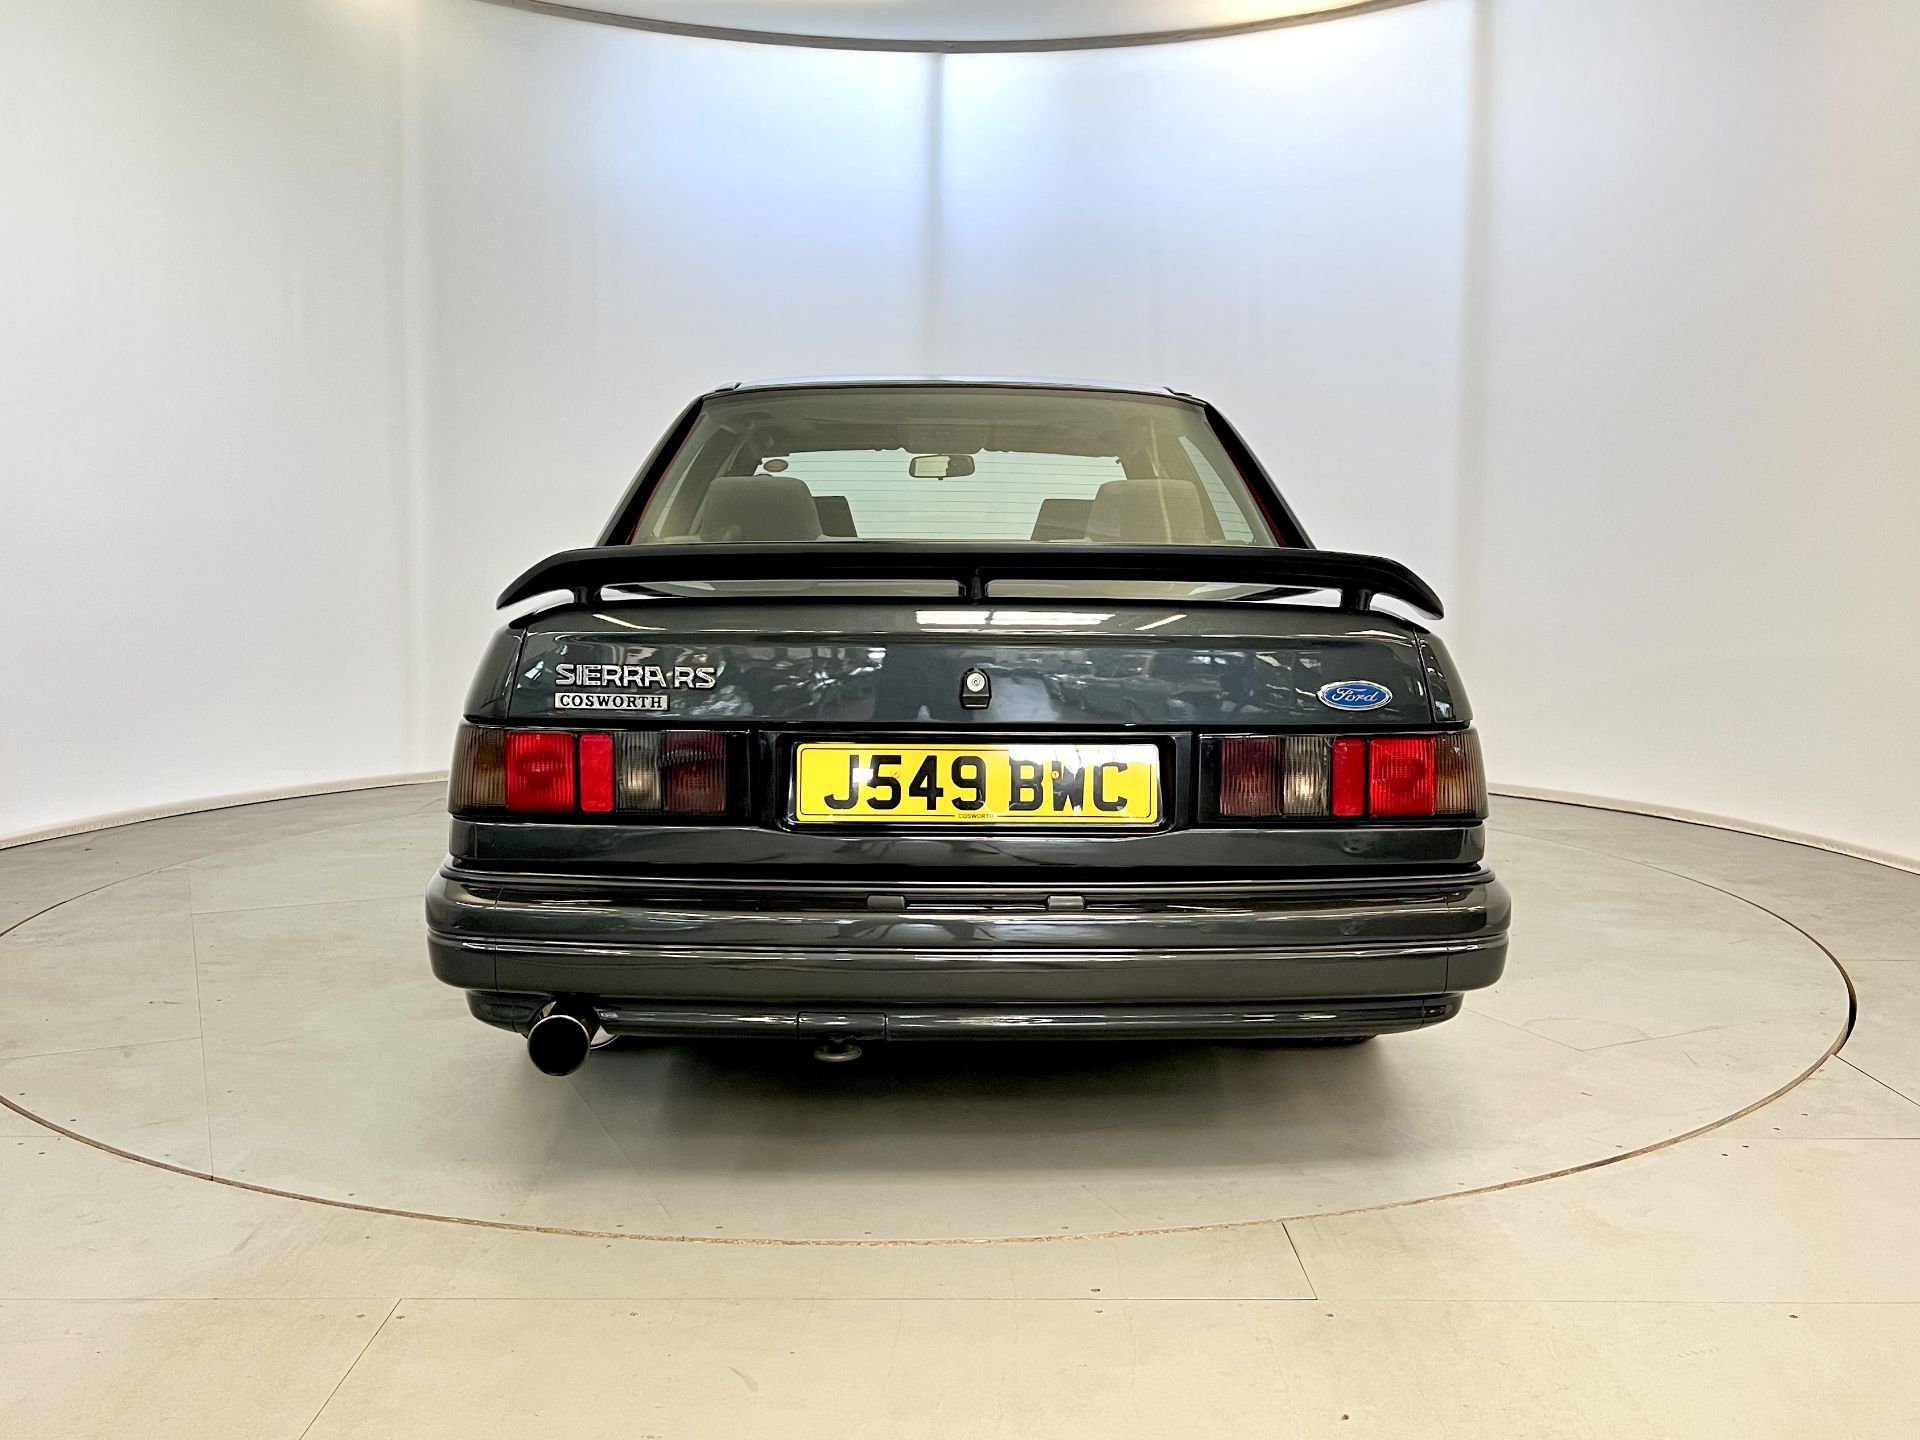 Ford Sierra Sapphire Cosworth - Image 8 of 37